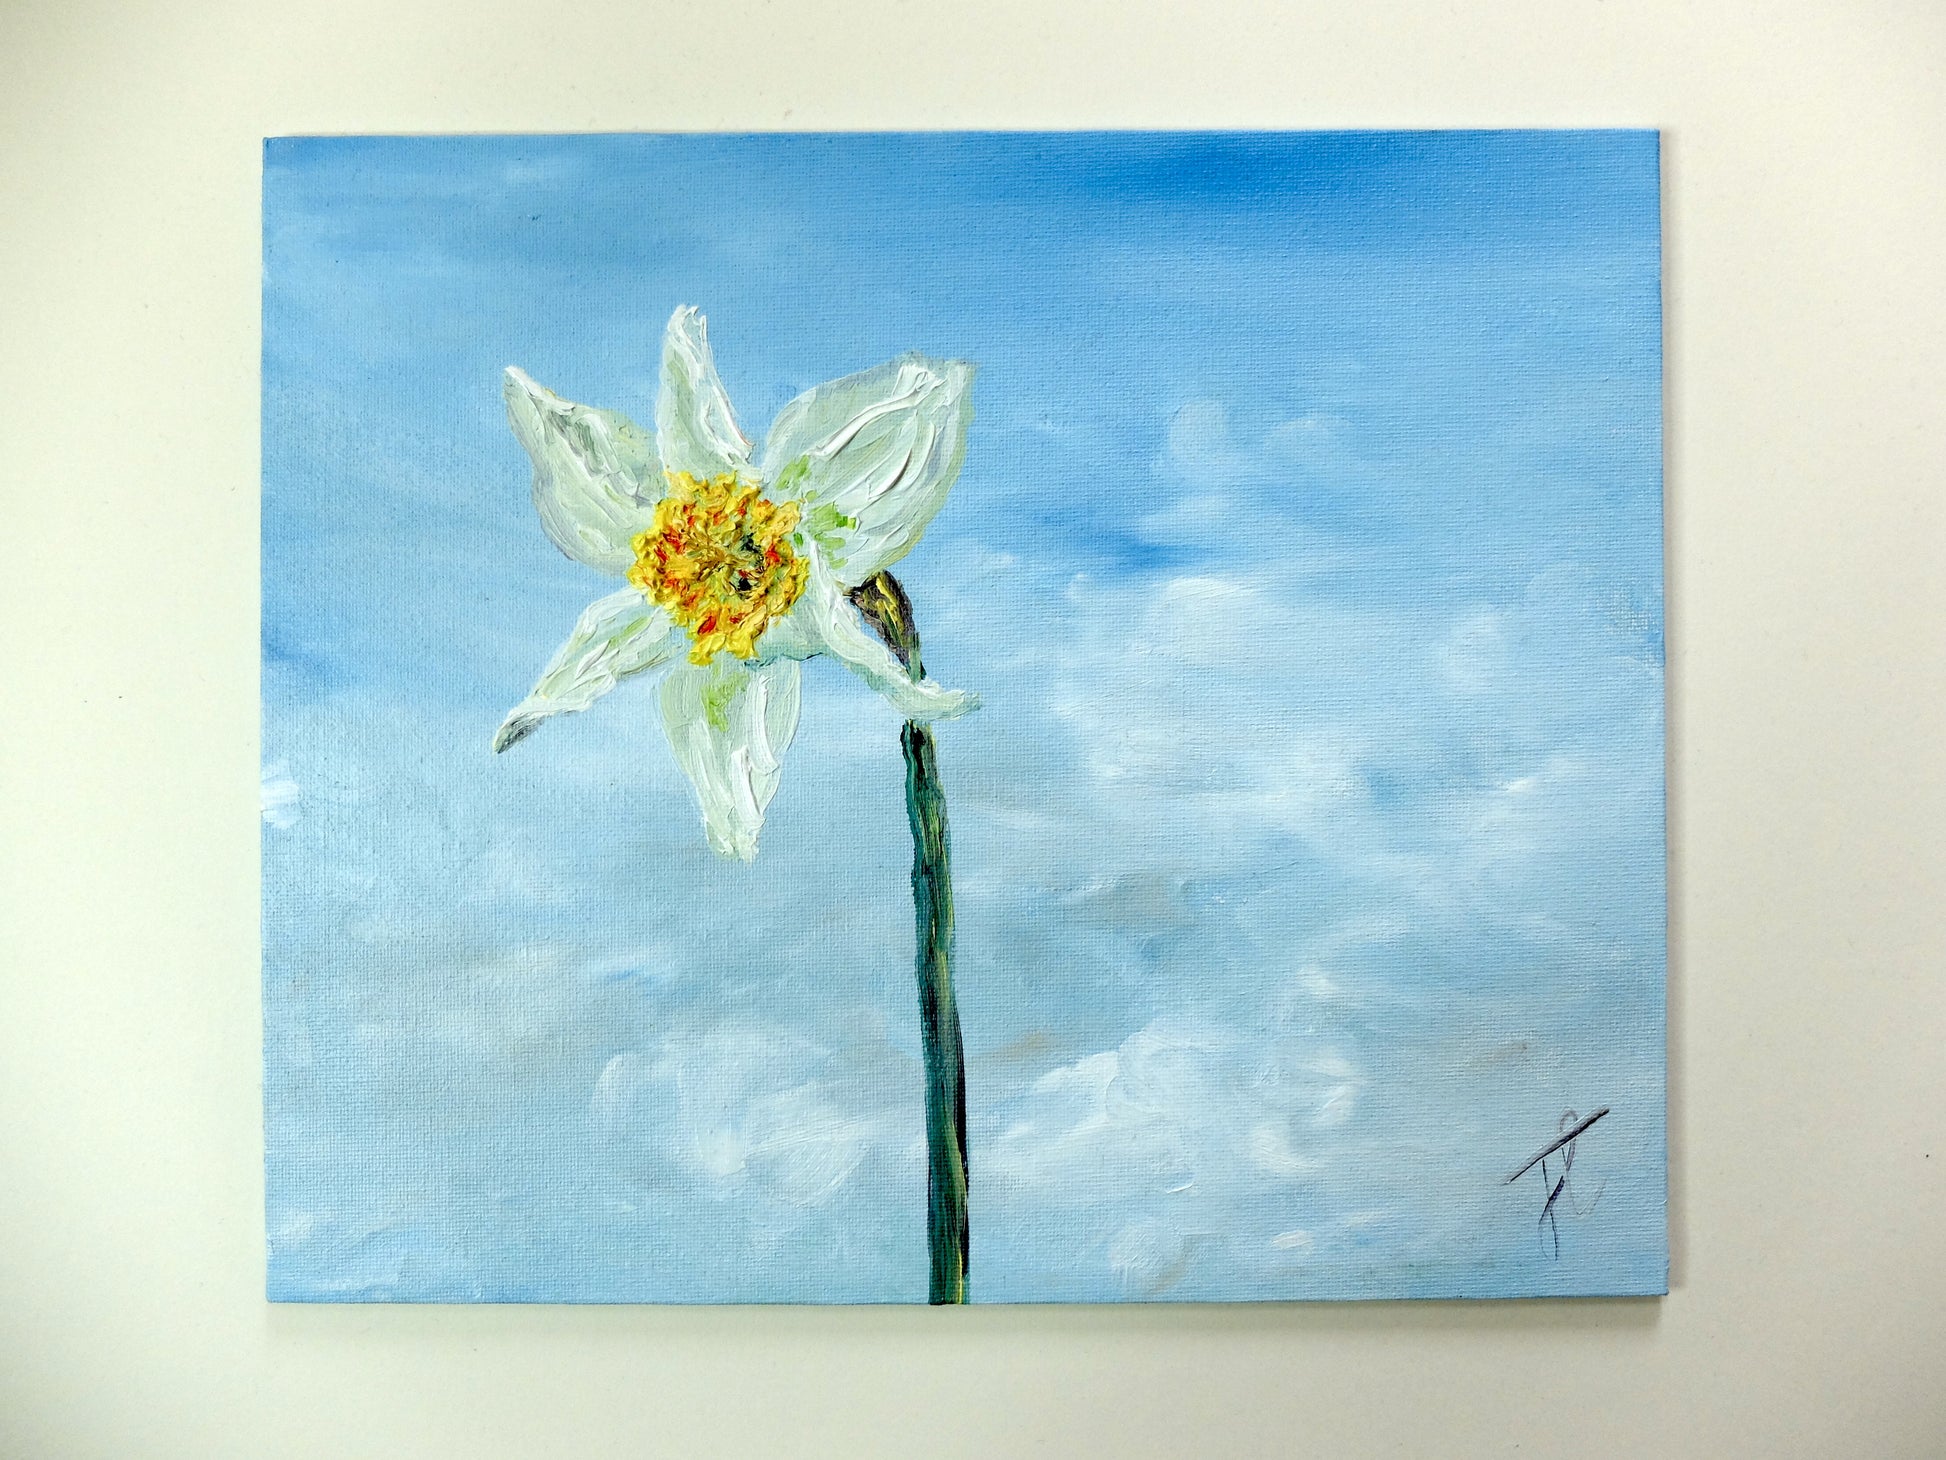 Painting of a single white daffodil with yellow centre, against a blue sky with soft white clouds. The paint comprising the daffodil's surface is textured. The painting is photographed against a light creamy-white background.